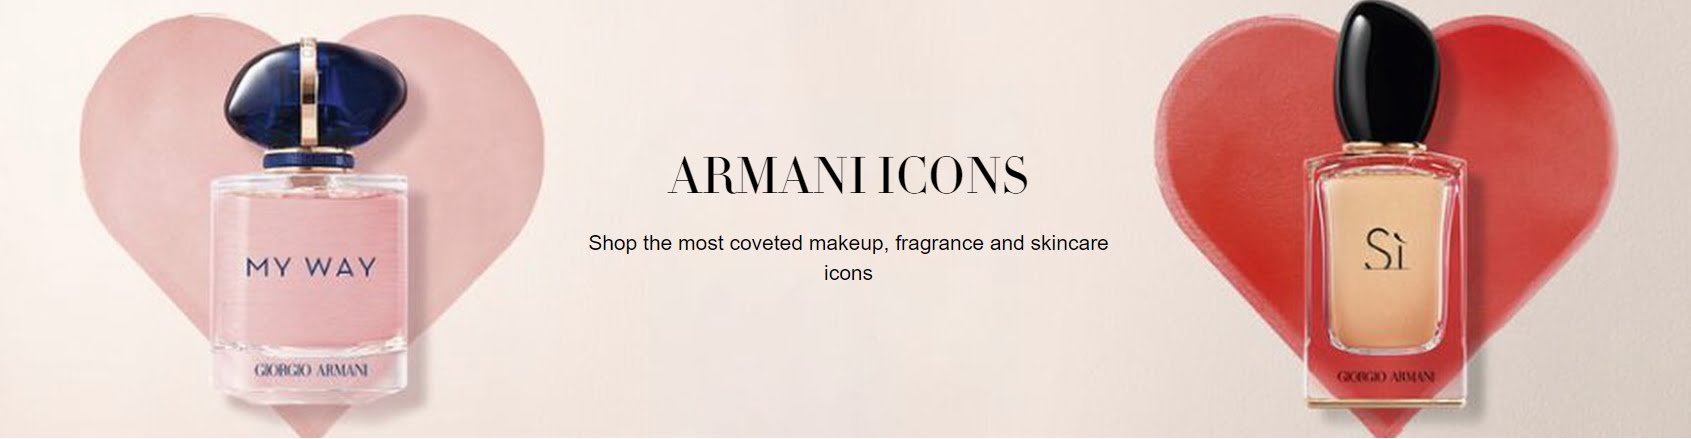 20% off selected Armani products